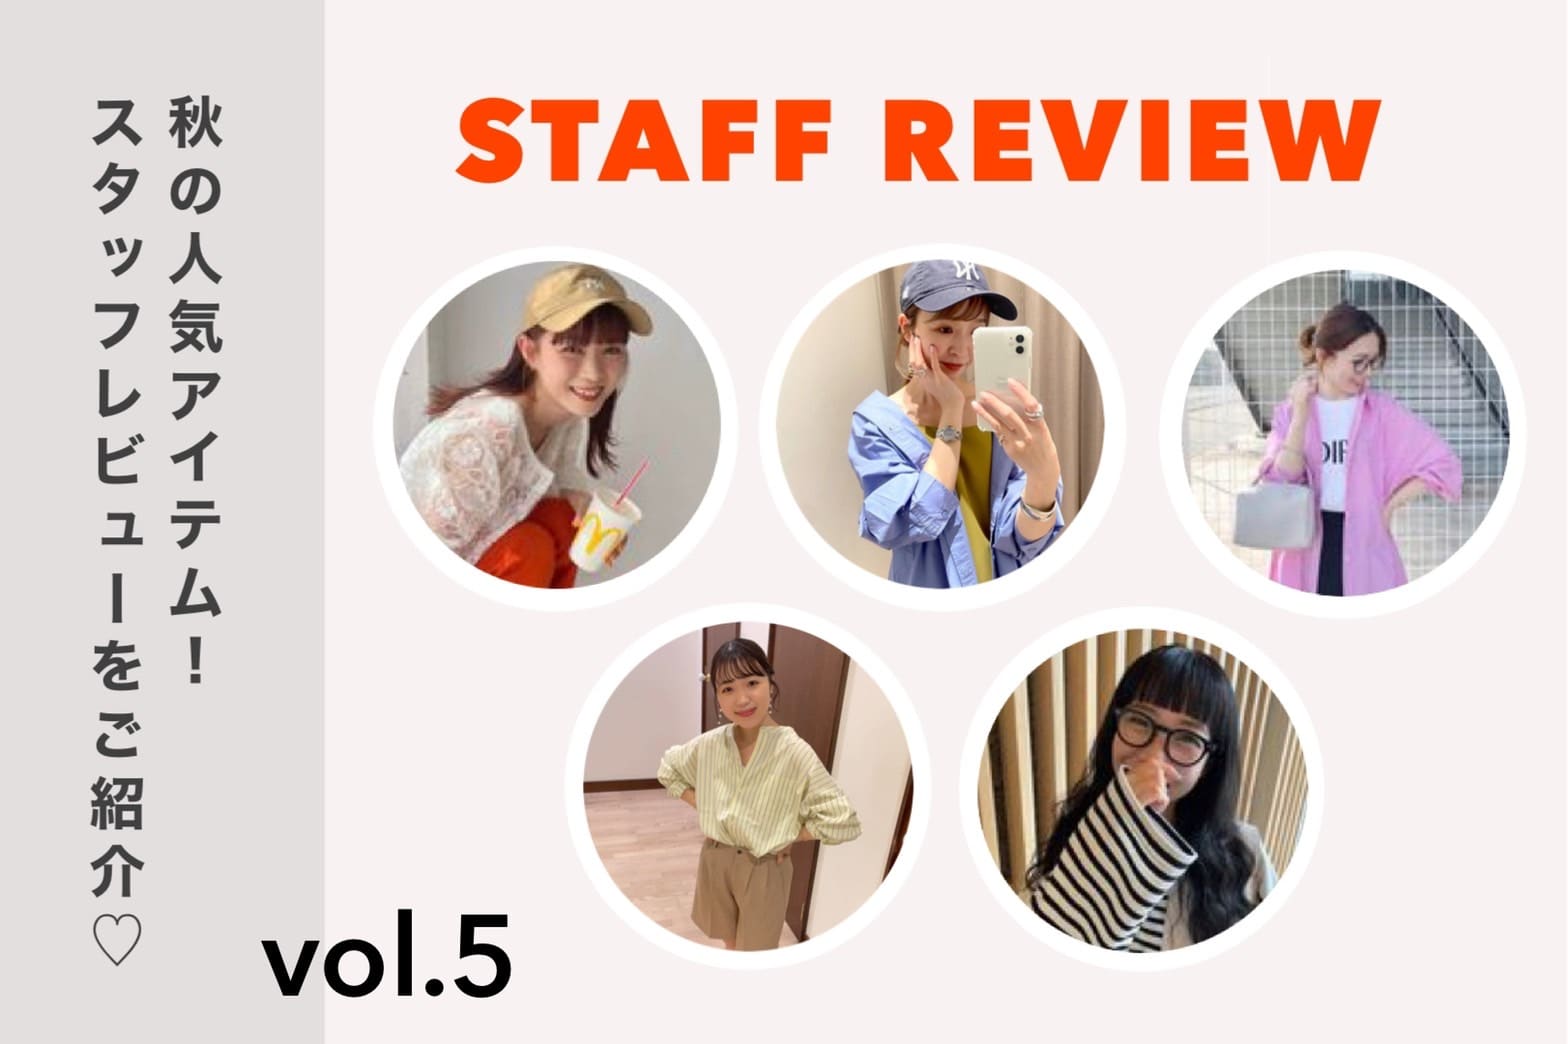 【STAFF REVIEW vol.5】秋の人気アイテム！